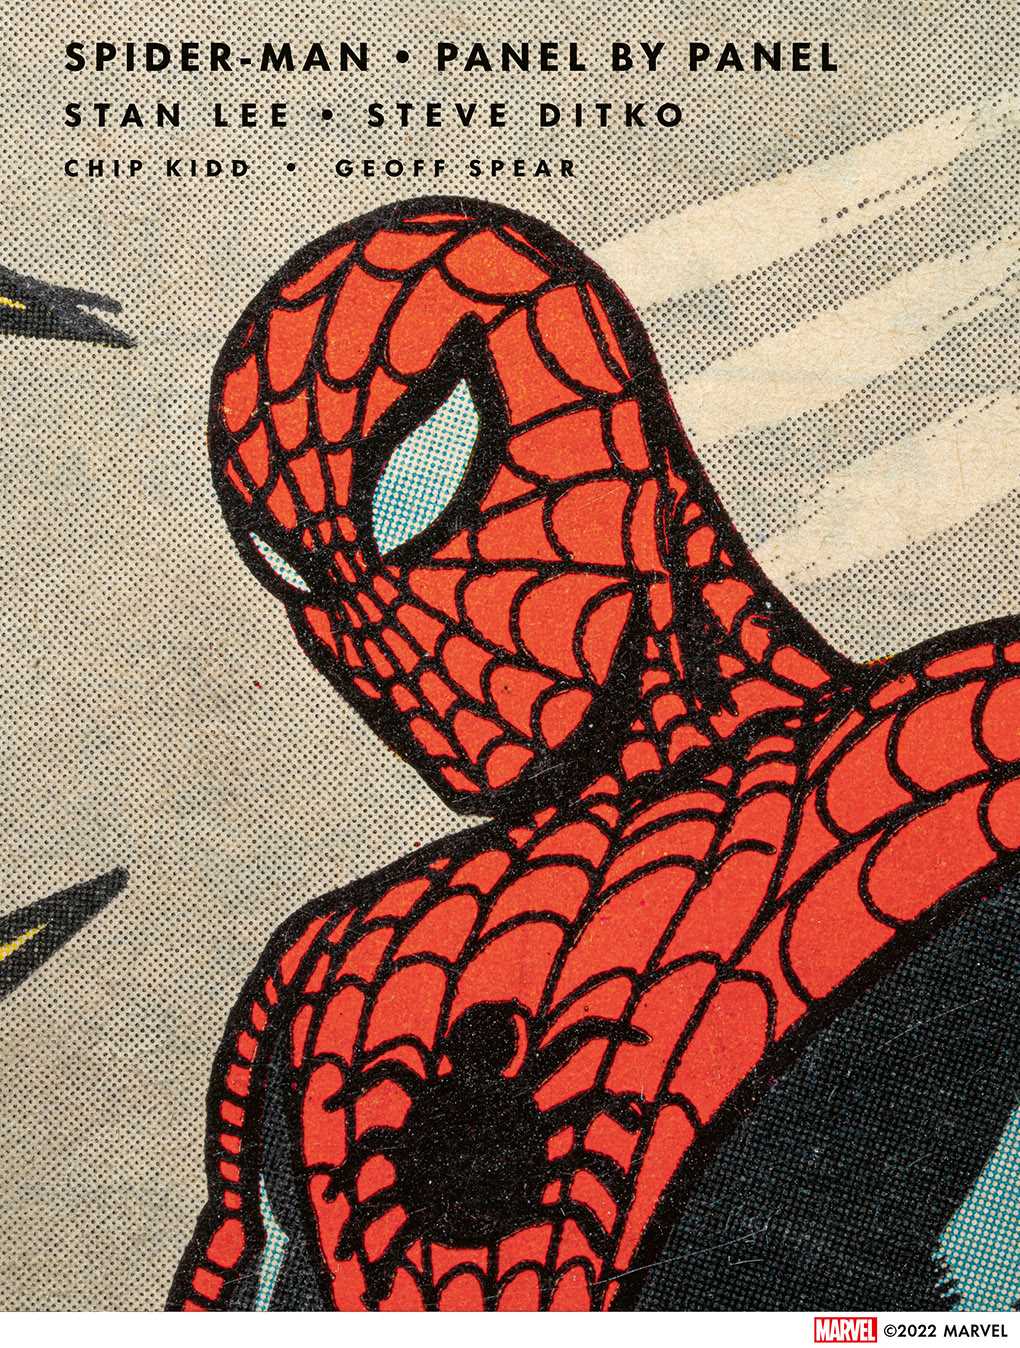 Spider-Man (Panel by Panel)